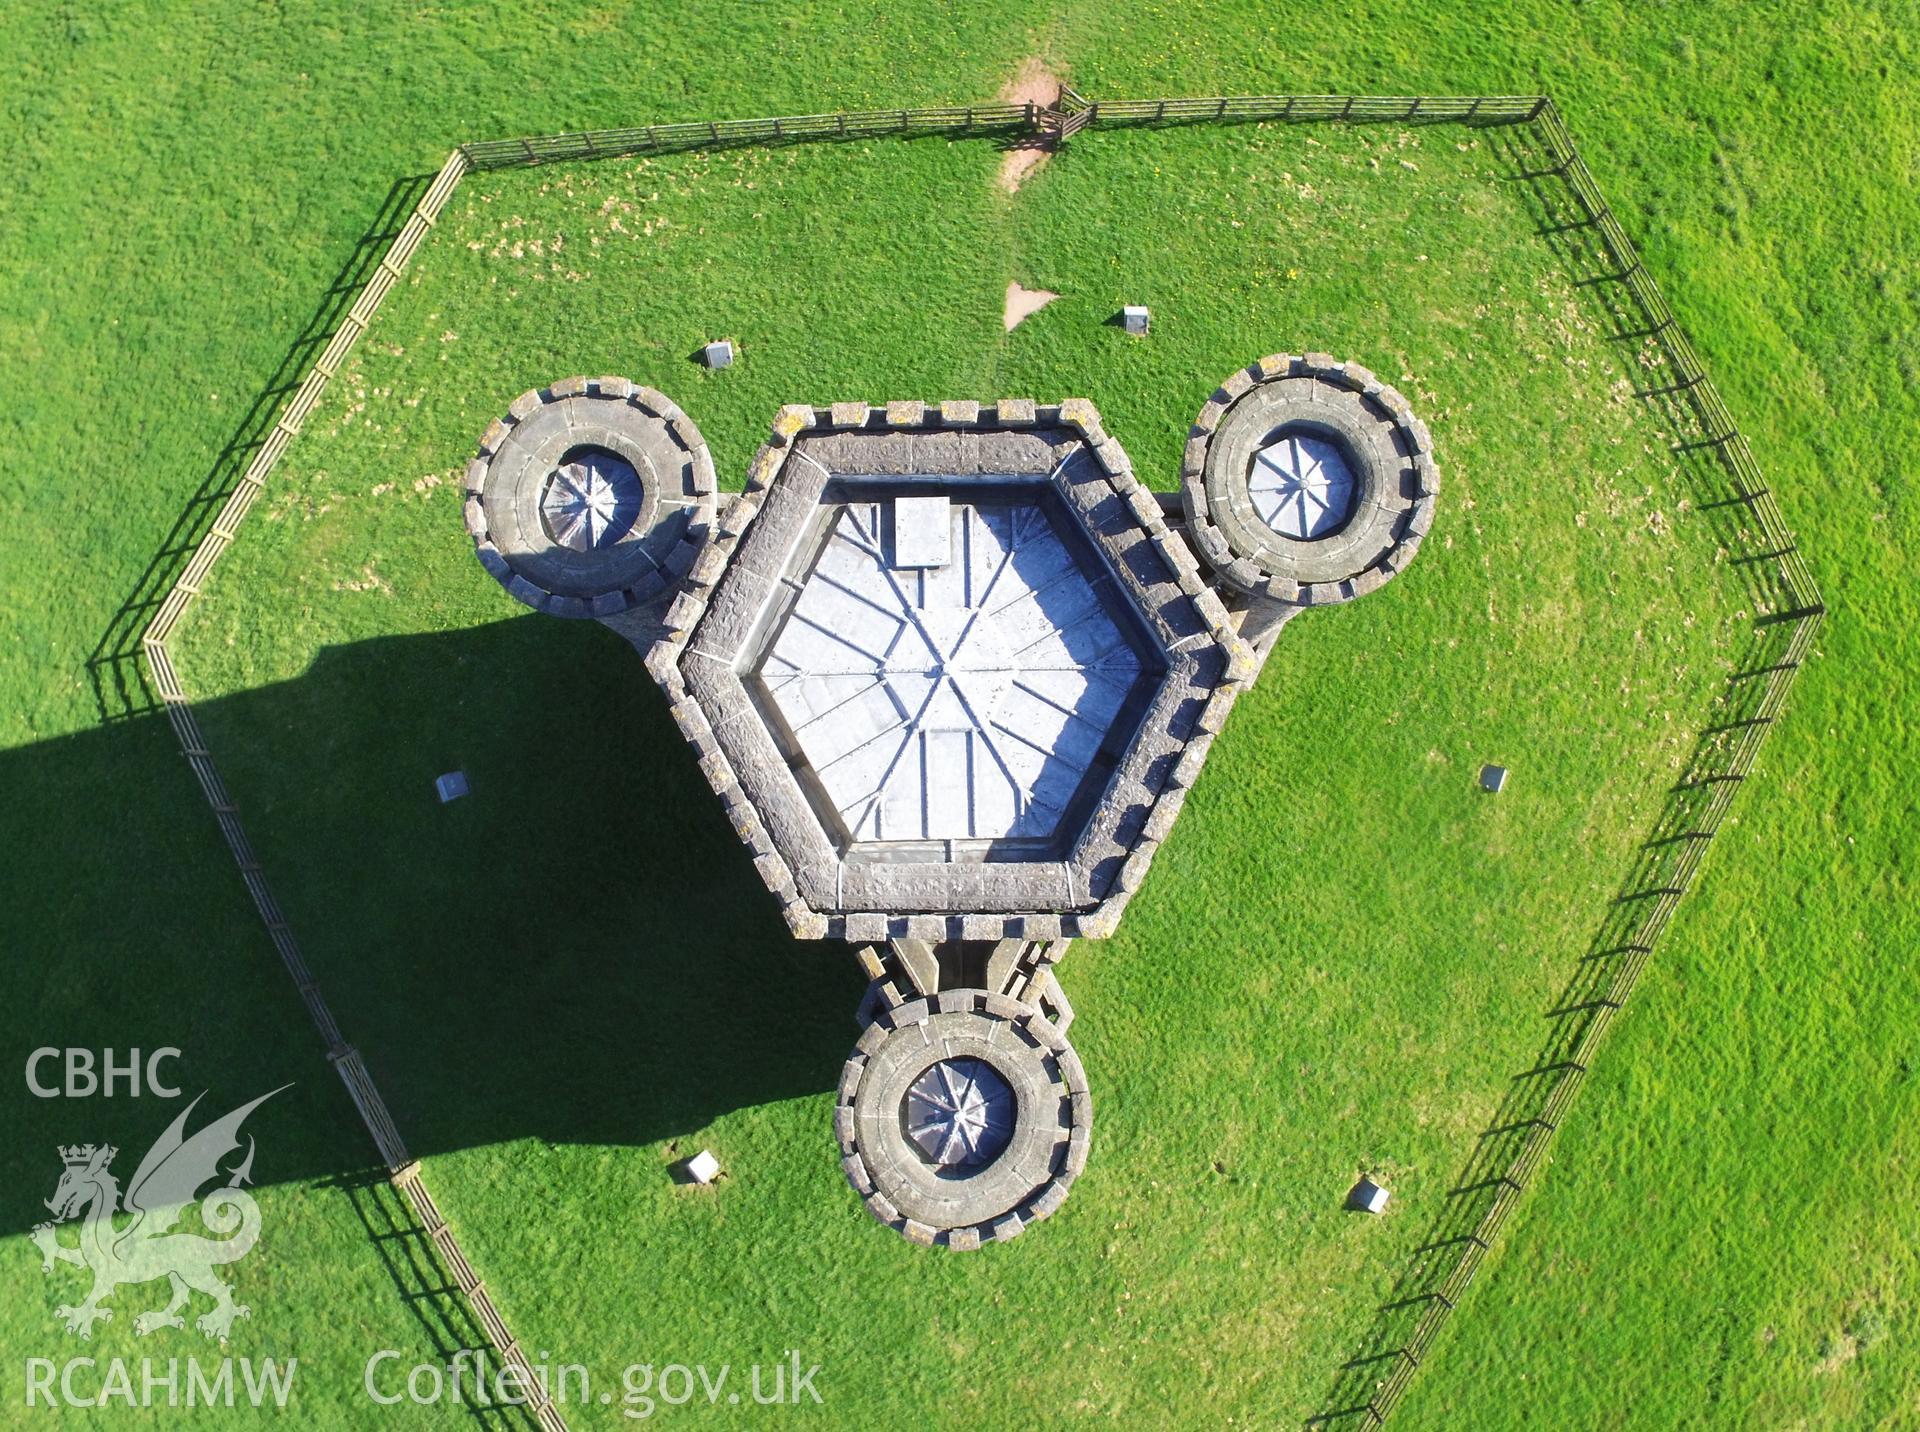 Colour photo showing aerial view of Nelson's Tower near Middleton Hall, Llanarthney, taken by Paul R. Davis, 6th May 2018.